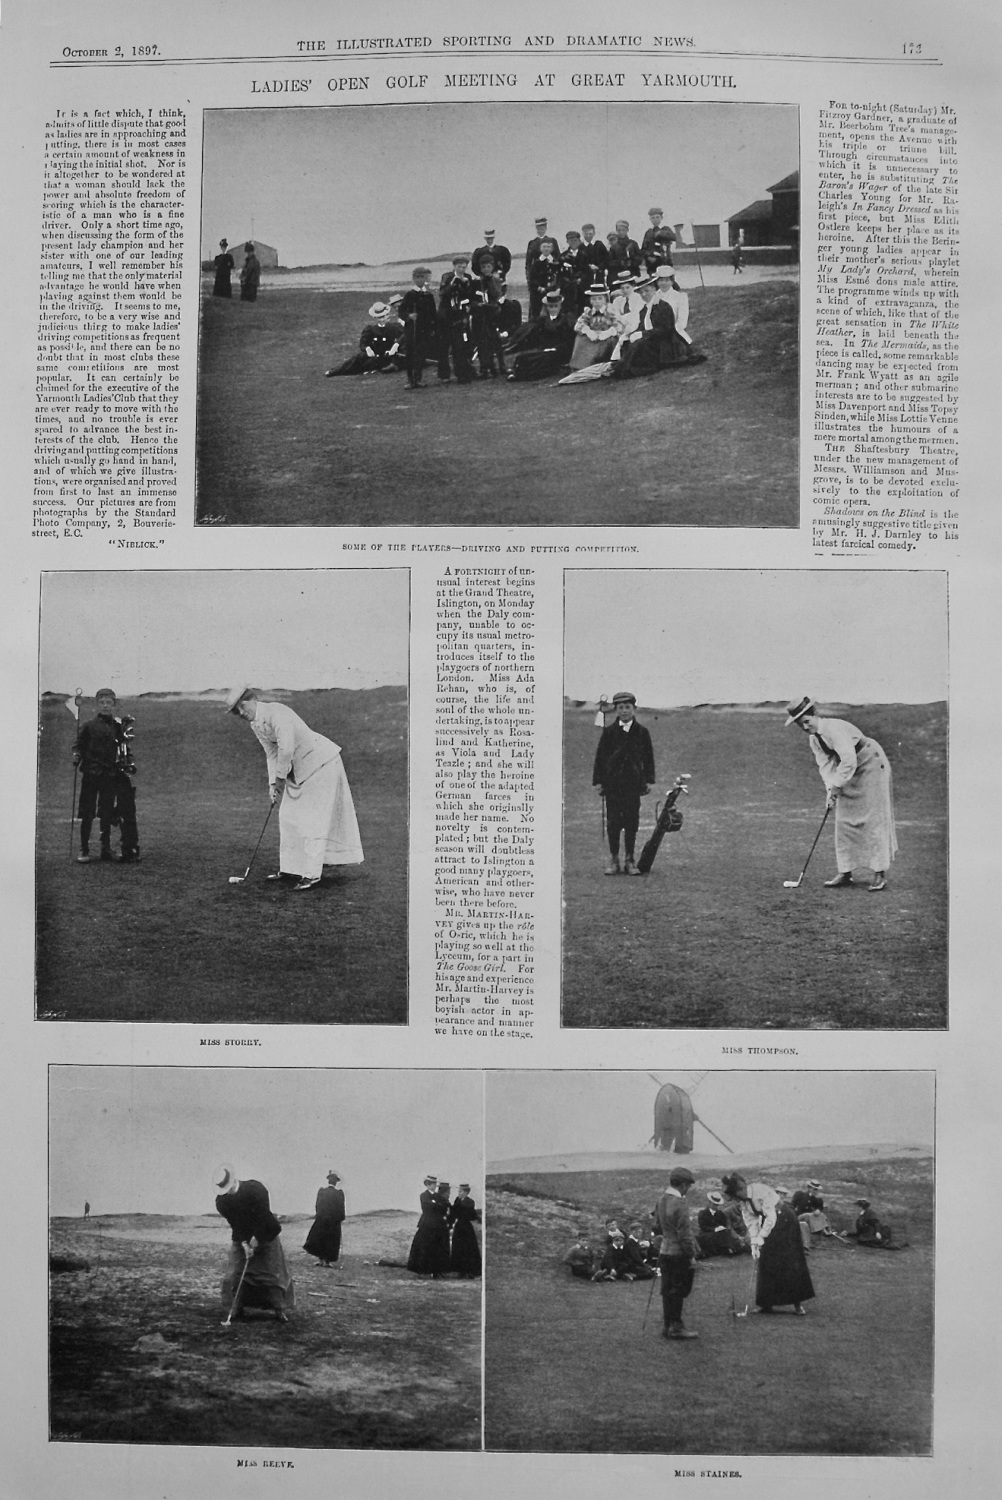 Ladies' Open Golf Meeting at Great Yarmouth. 1897